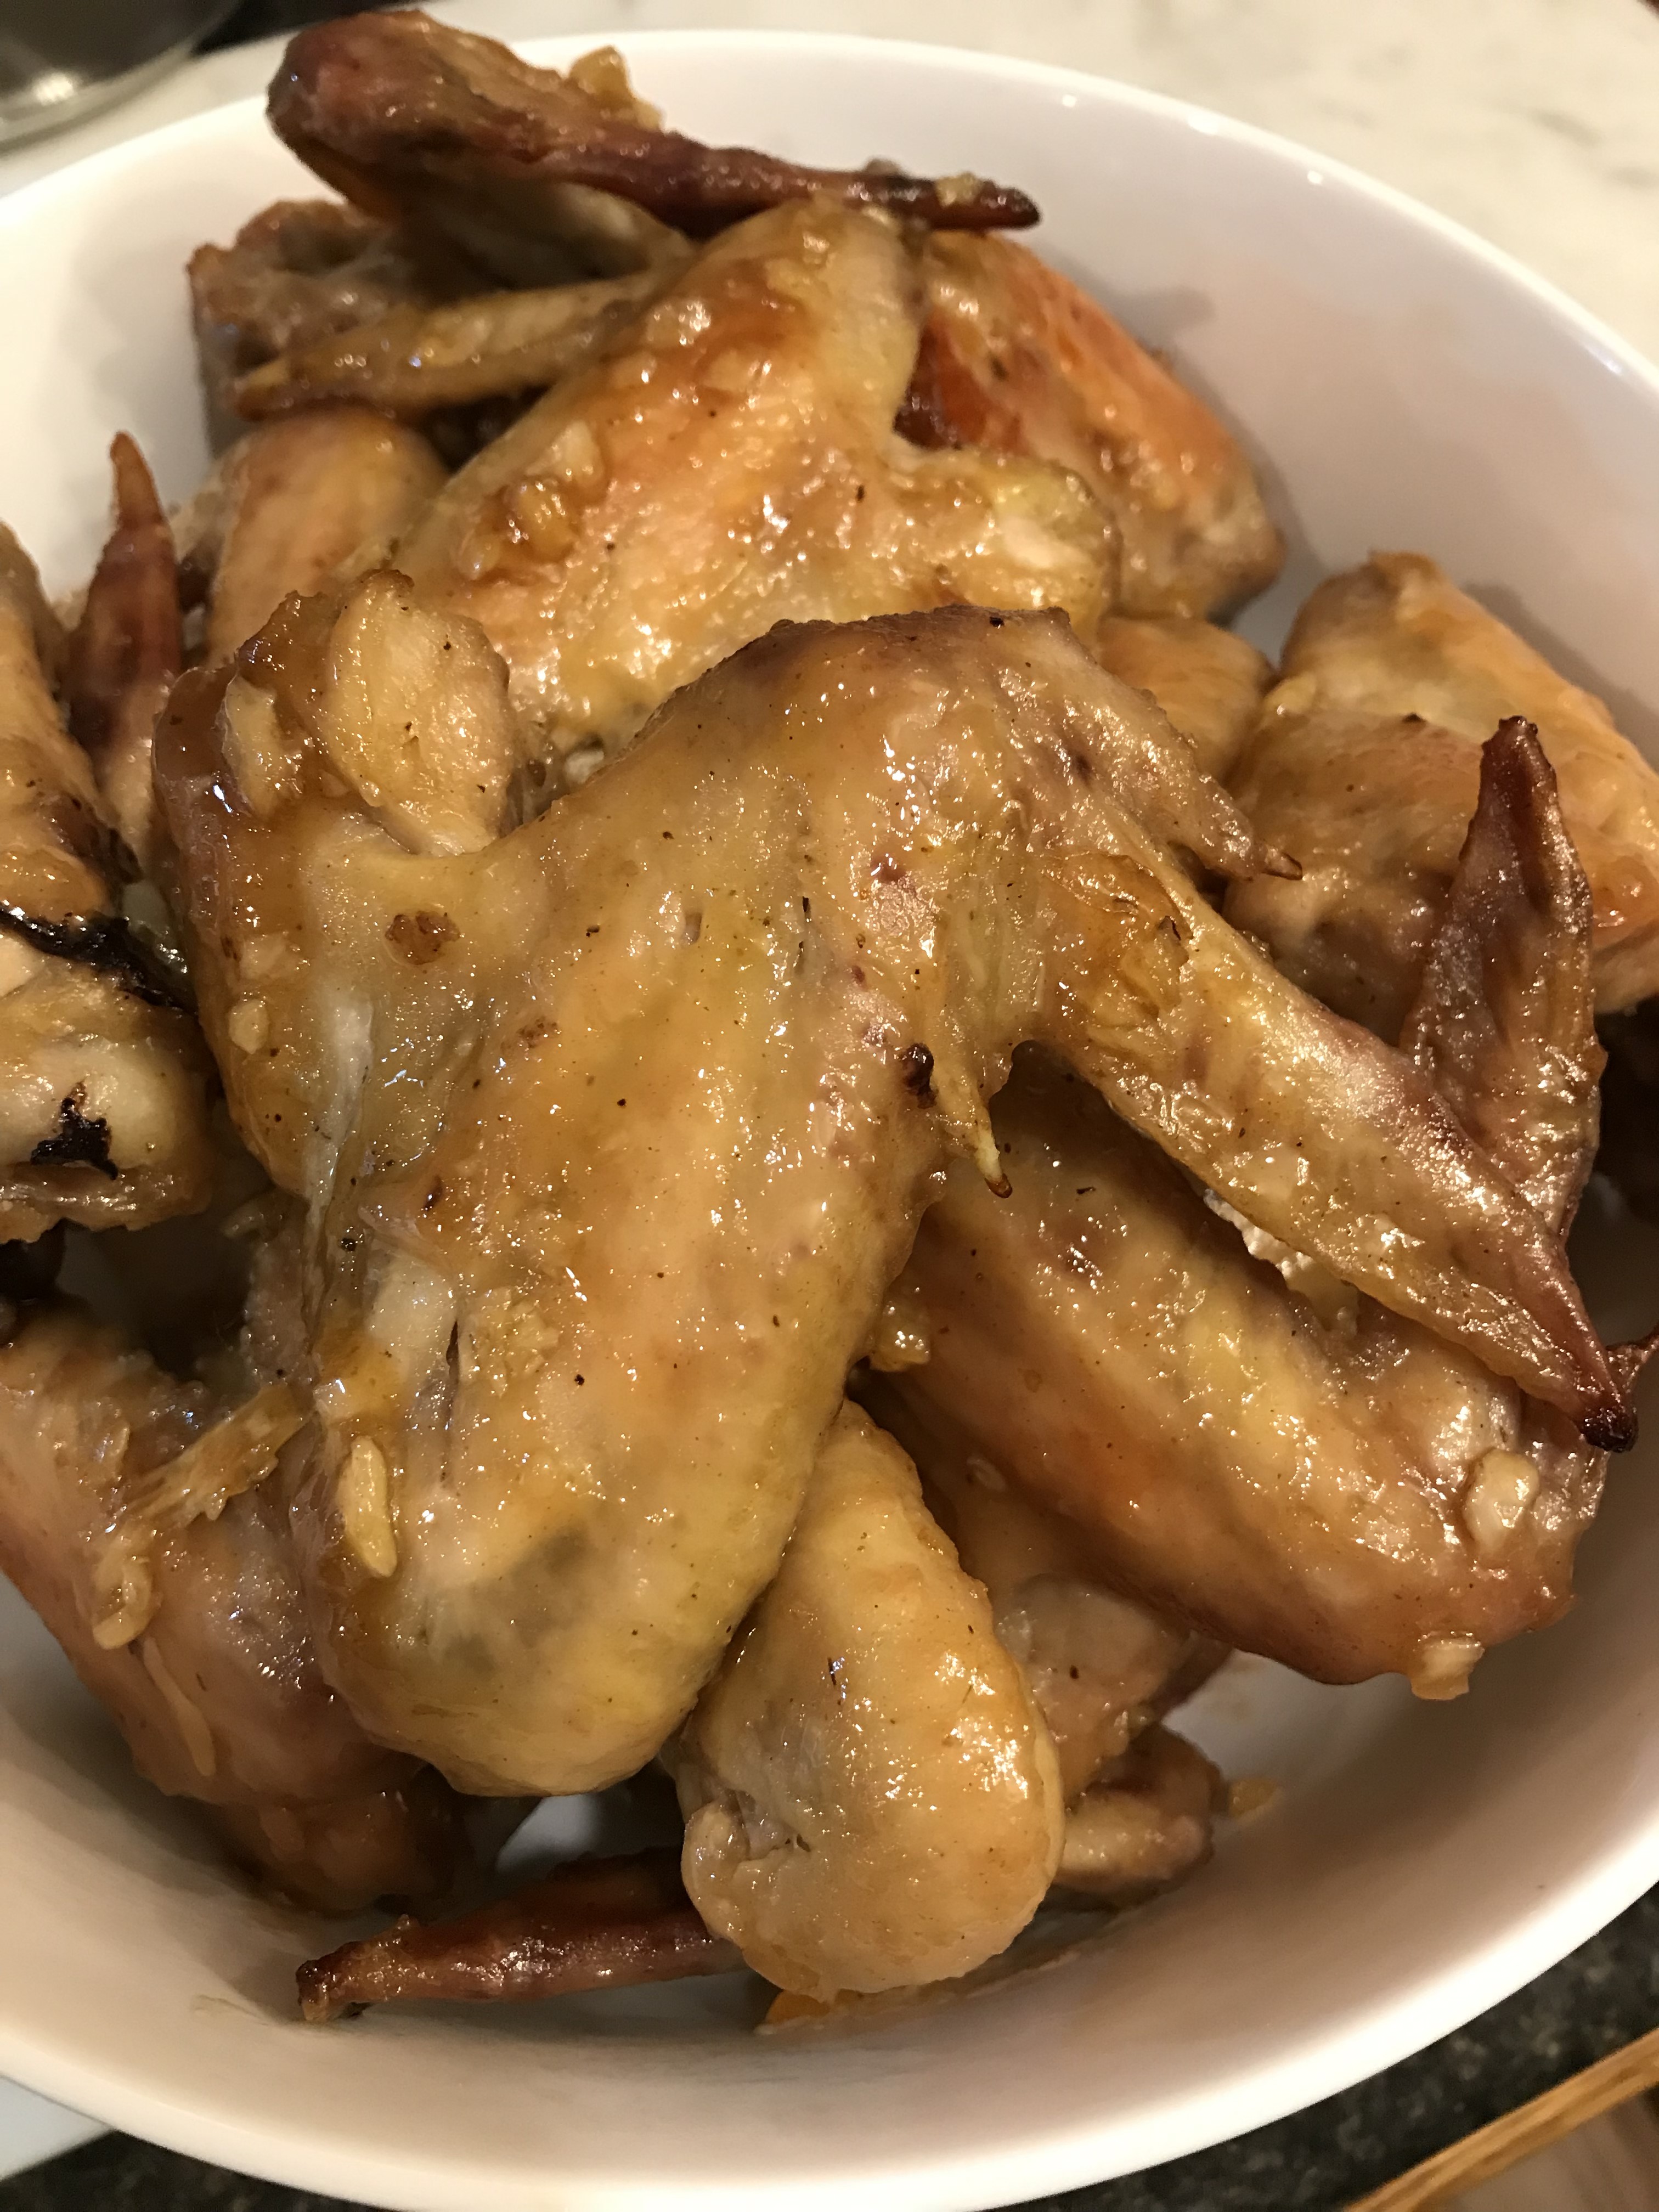 How to make a 'Super Bowl' of the most delicious wings!